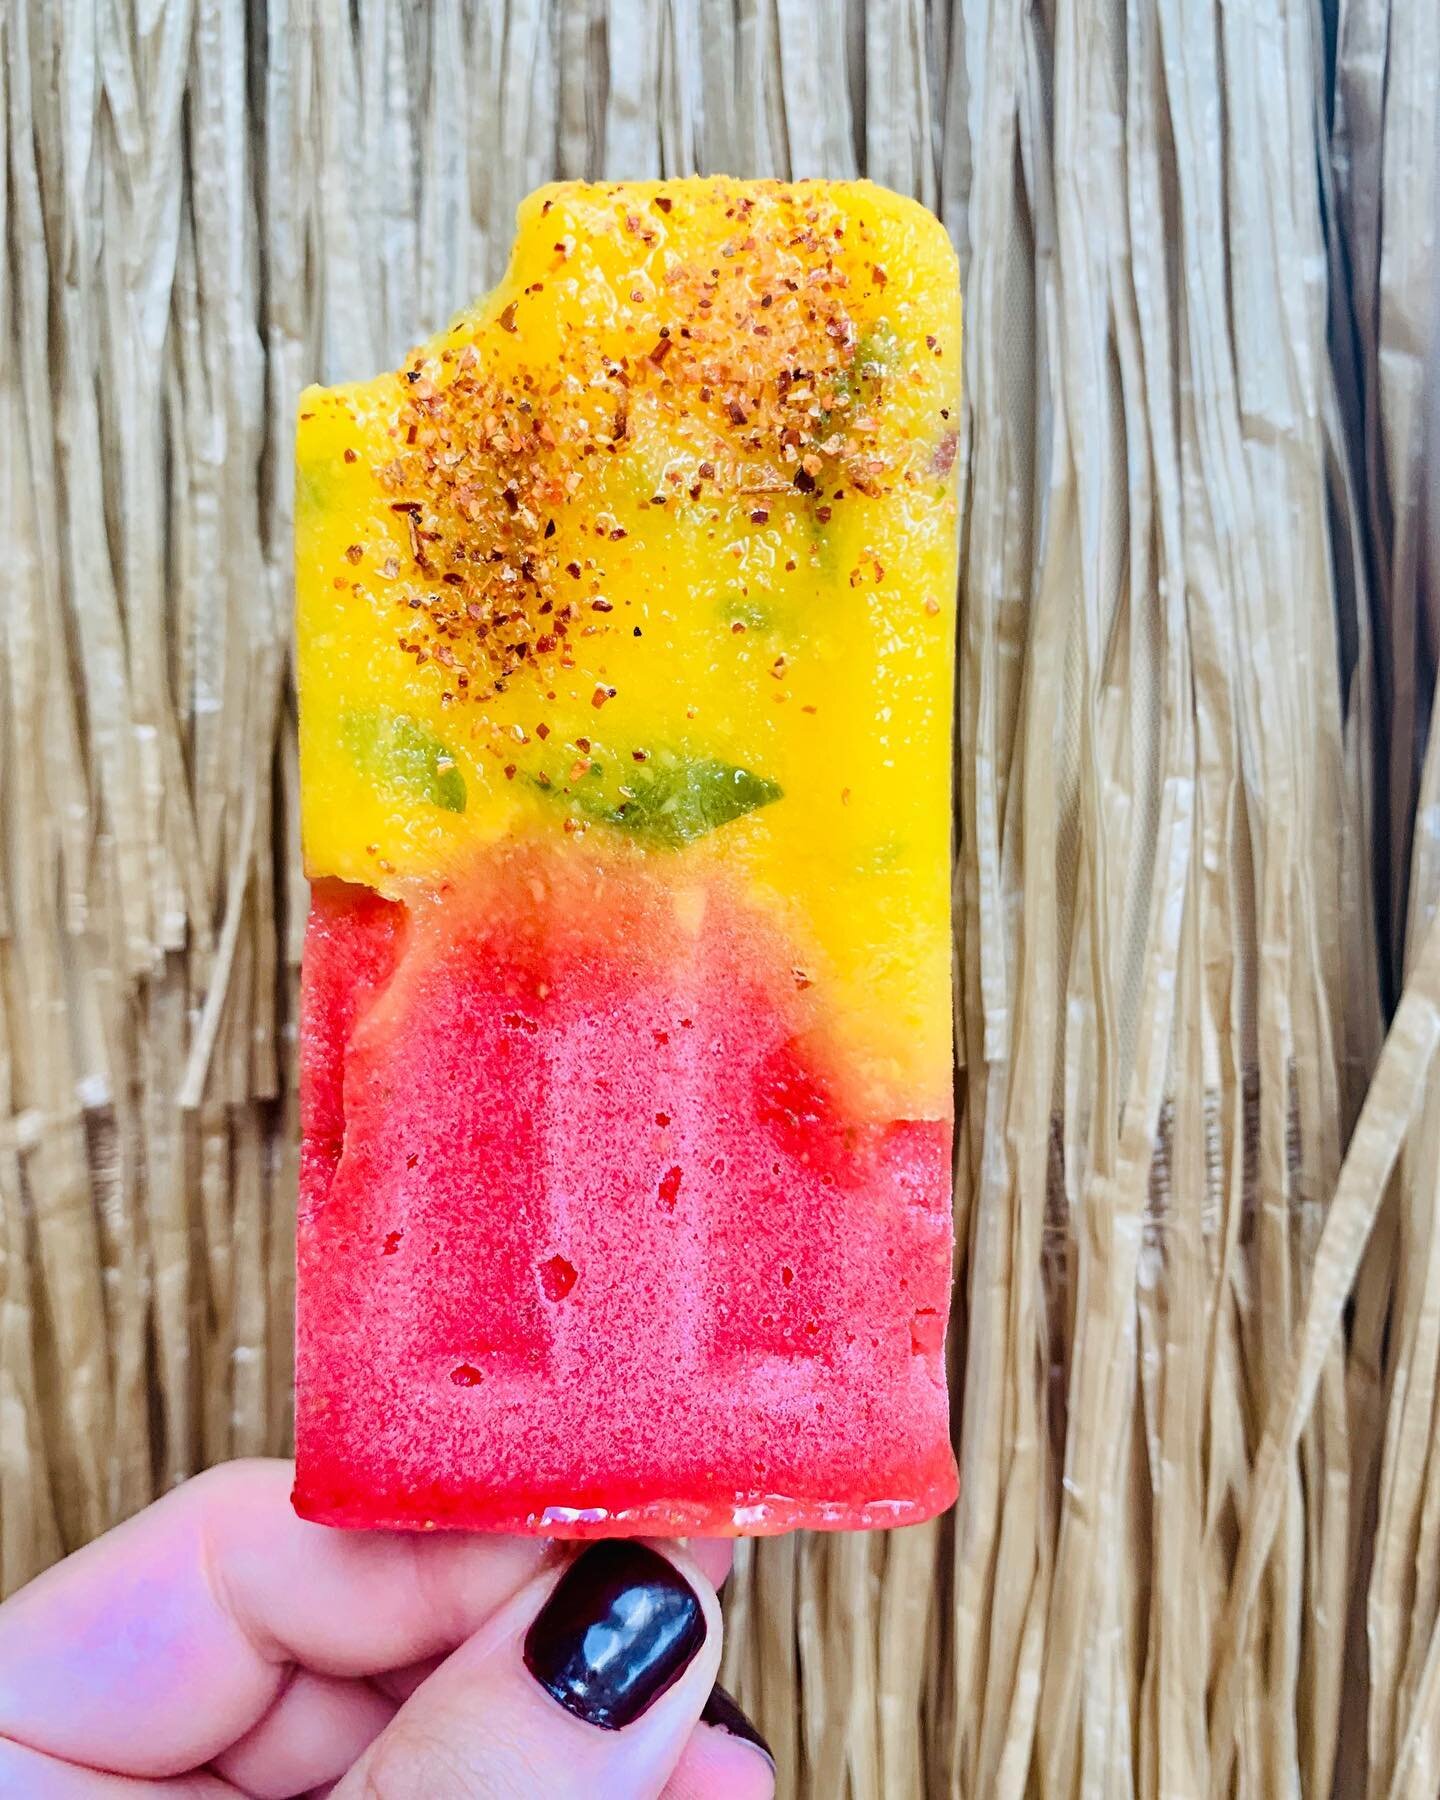 Lili&rsquo;s Tiki Pops &amp; Audubon Club now open for biz ft the Snaiquiri (an ode to summers/nutcrackers/beach mango with @tinyboots.) Sneak peak of your frozen boozy pop future on the @blueapron blog.